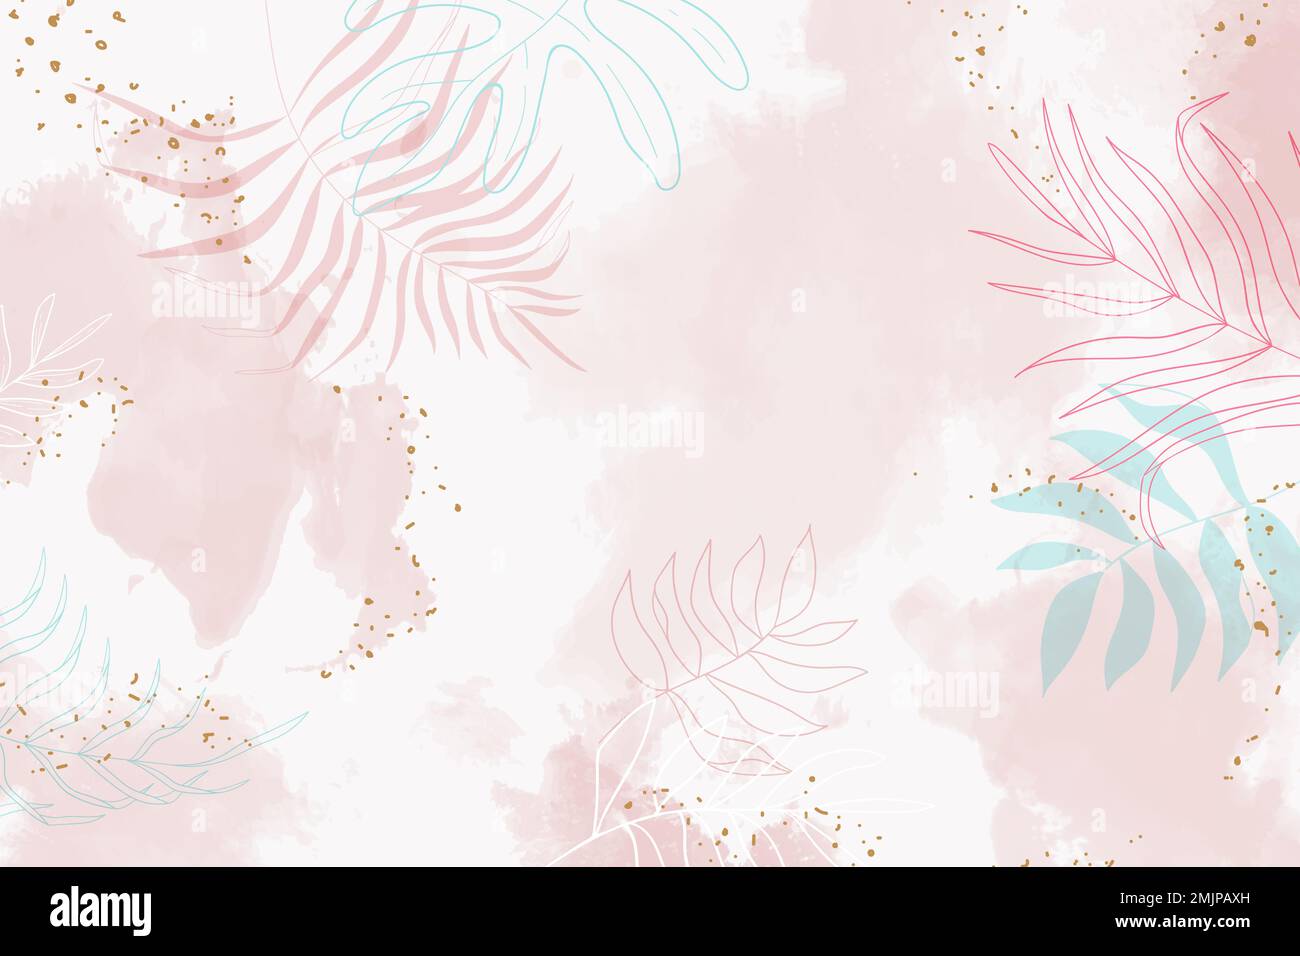 Pink leafy watercolor background vector Stock Vector